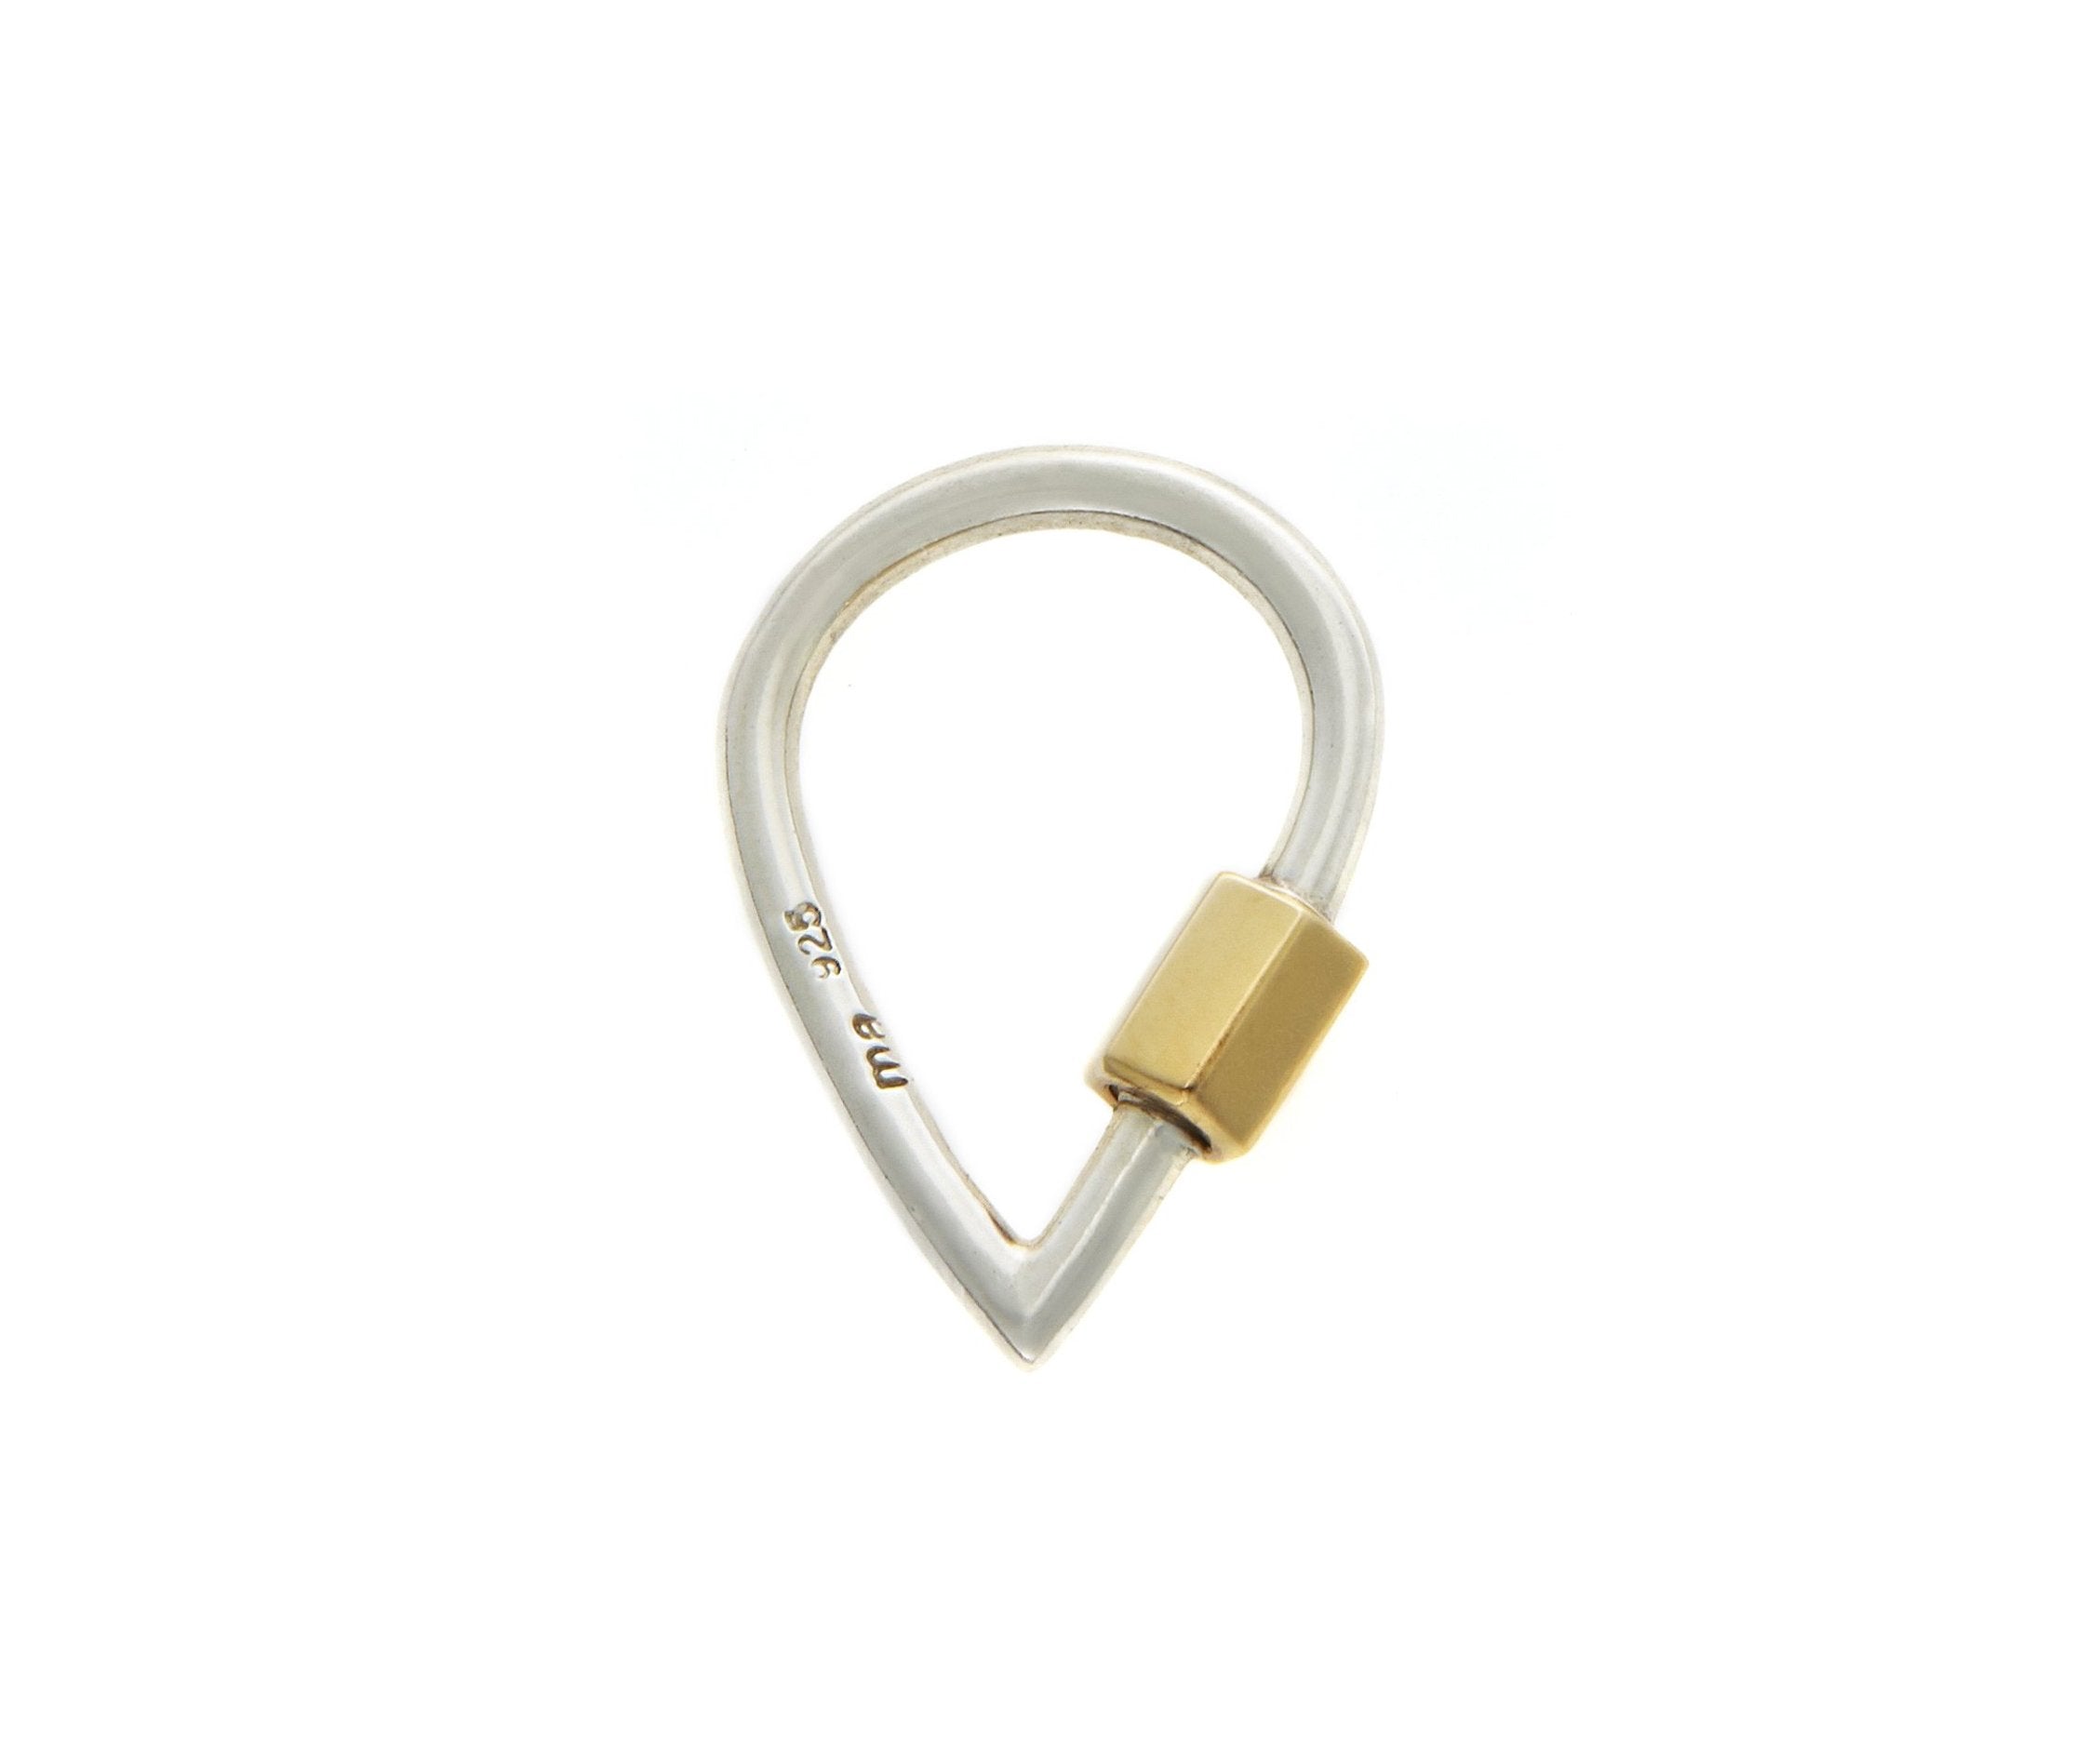 Yellow gold and silver droplock with closed clasp